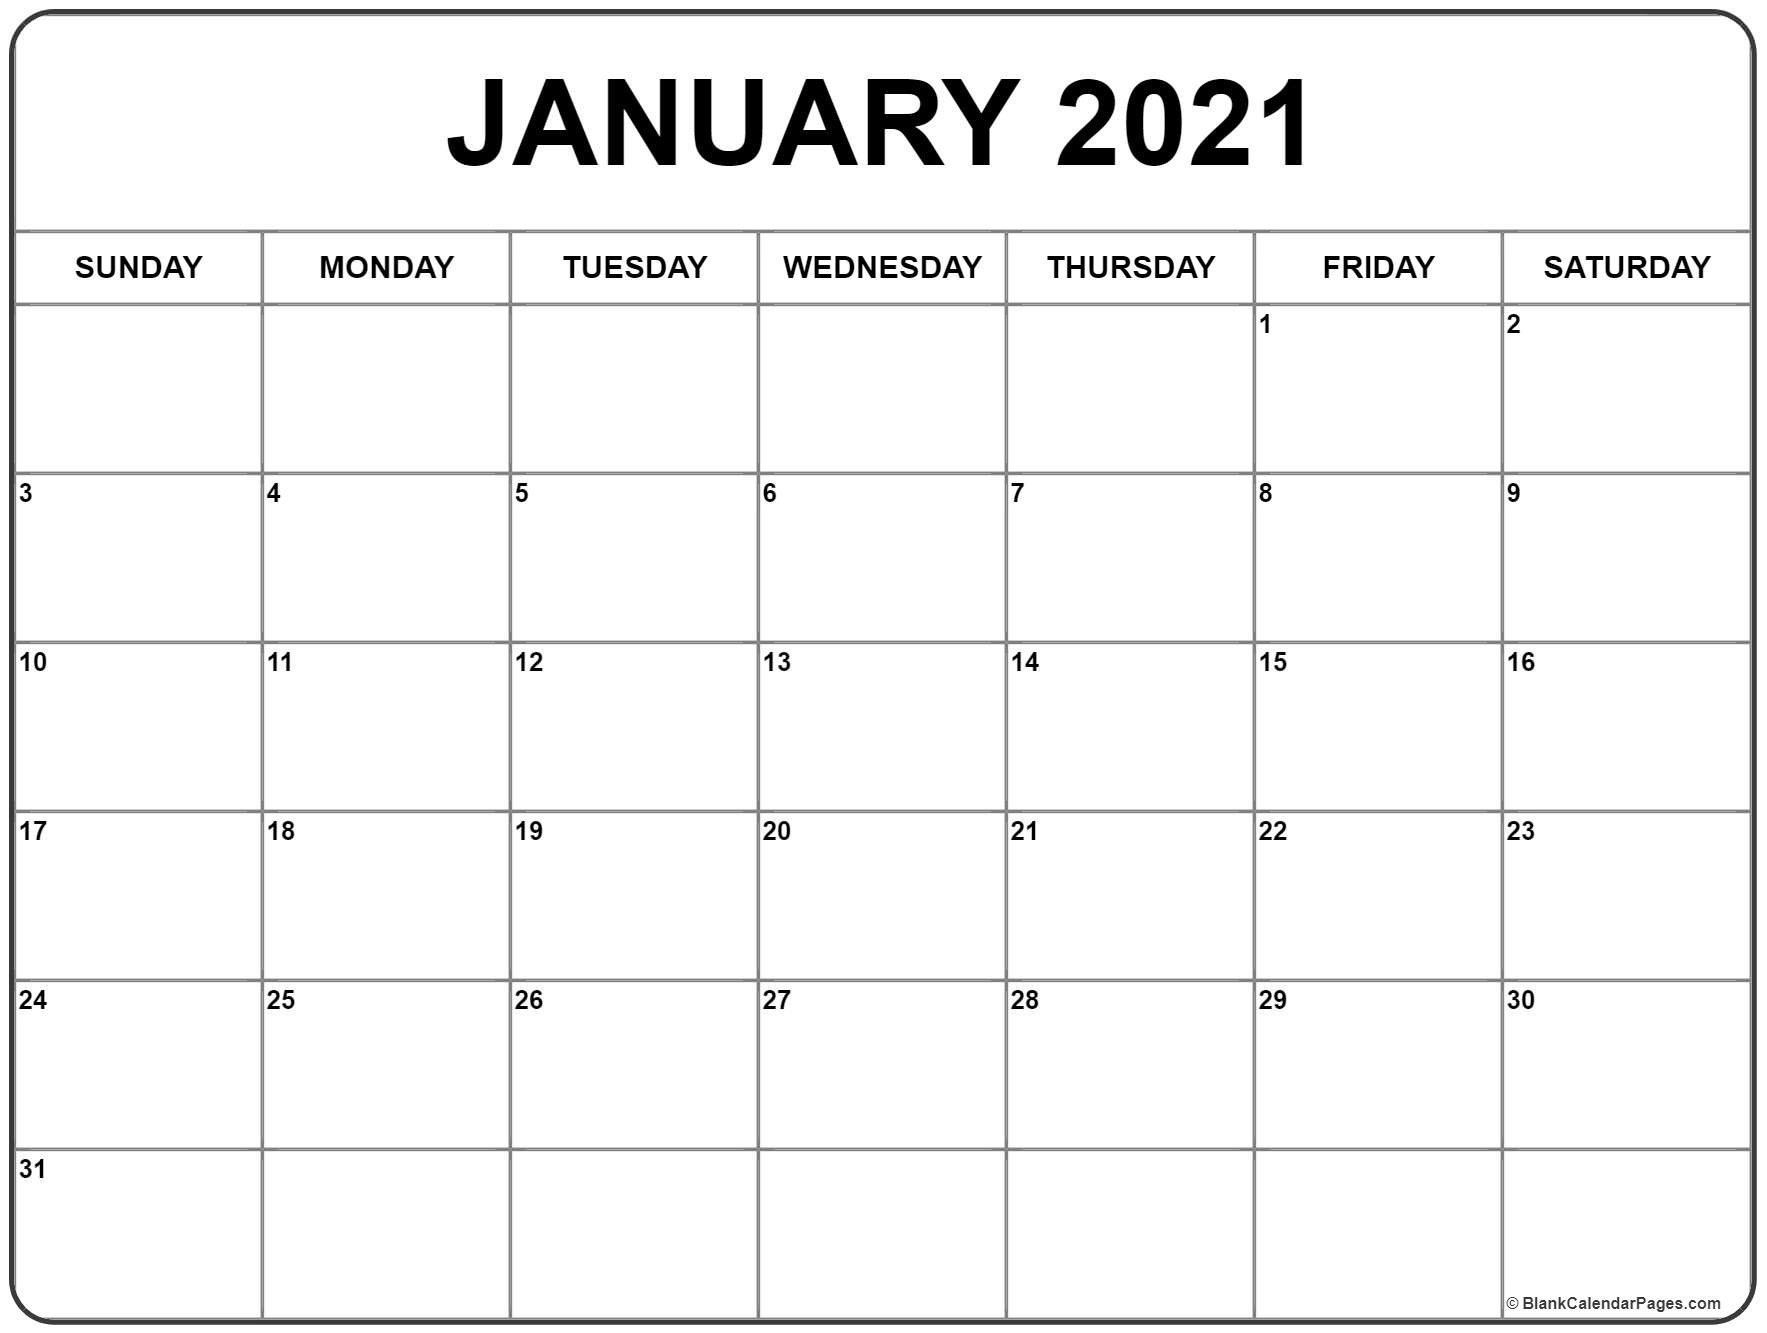 Free January 2021 Calendar Page In 2020 | Monthly Calendar